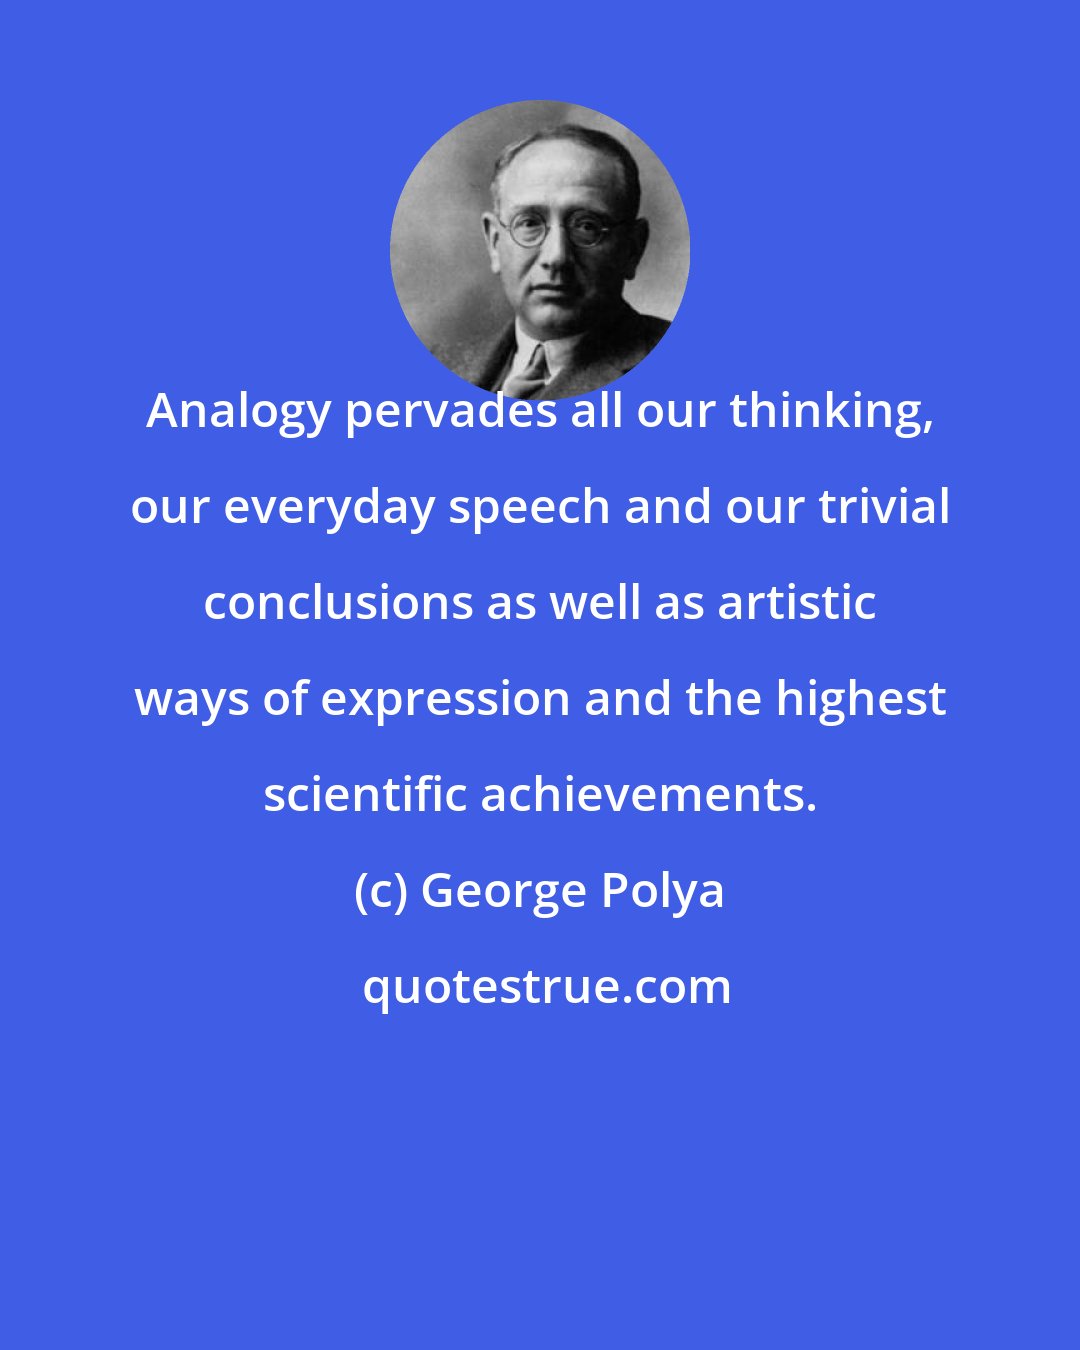 George Polya: Analogy pervades all our thinking, our everyday speech and our trivial conclusions as well as artistic ways of expression and the highest scientific achievements.